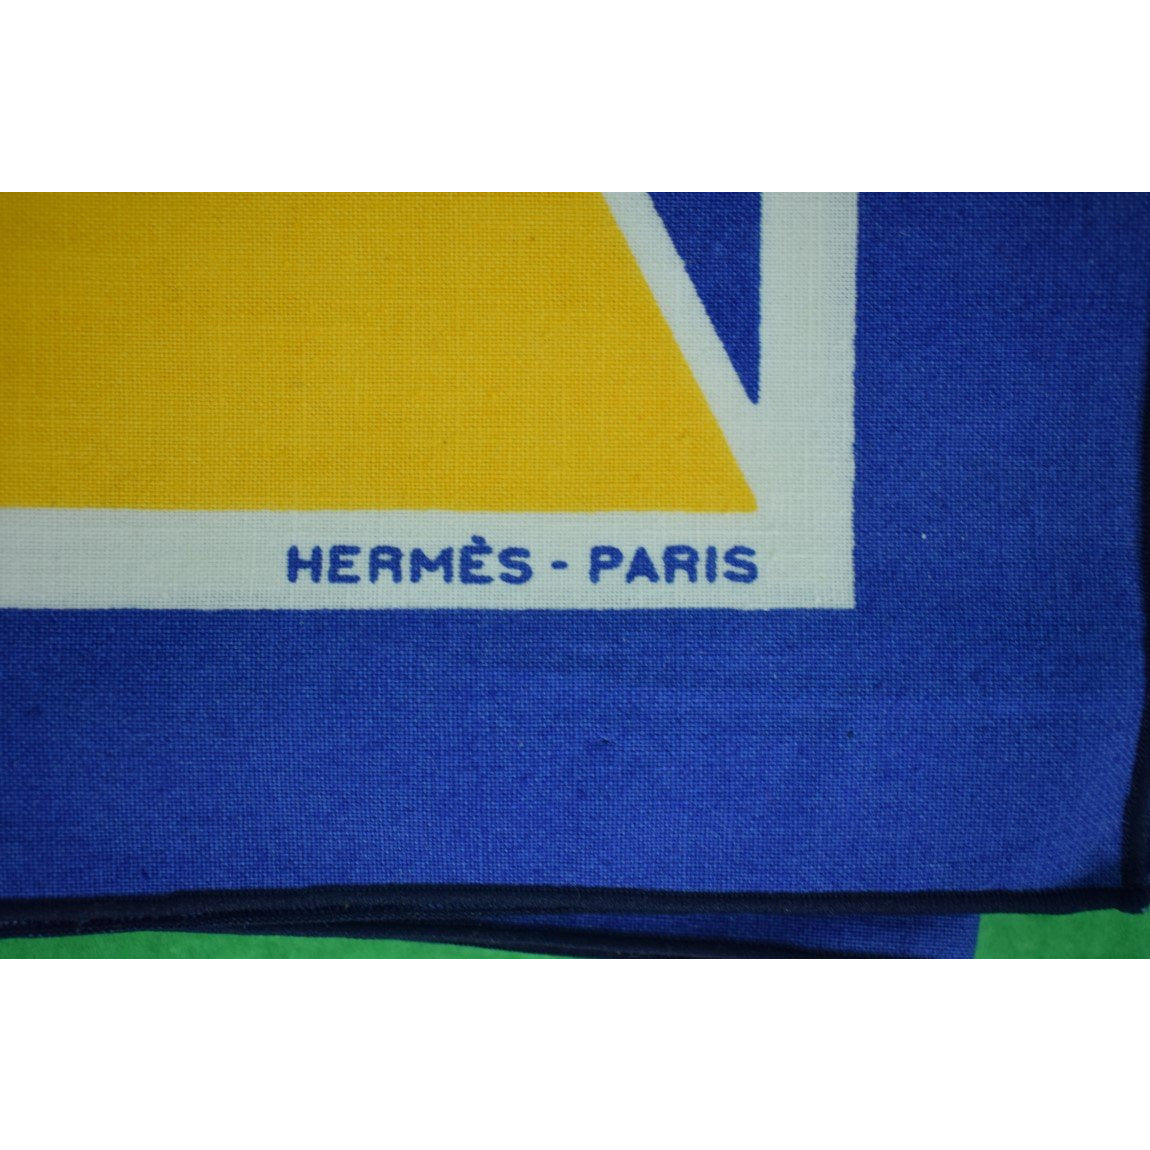 HERMES Set of 12 placemats and 12 assorted napkins with …